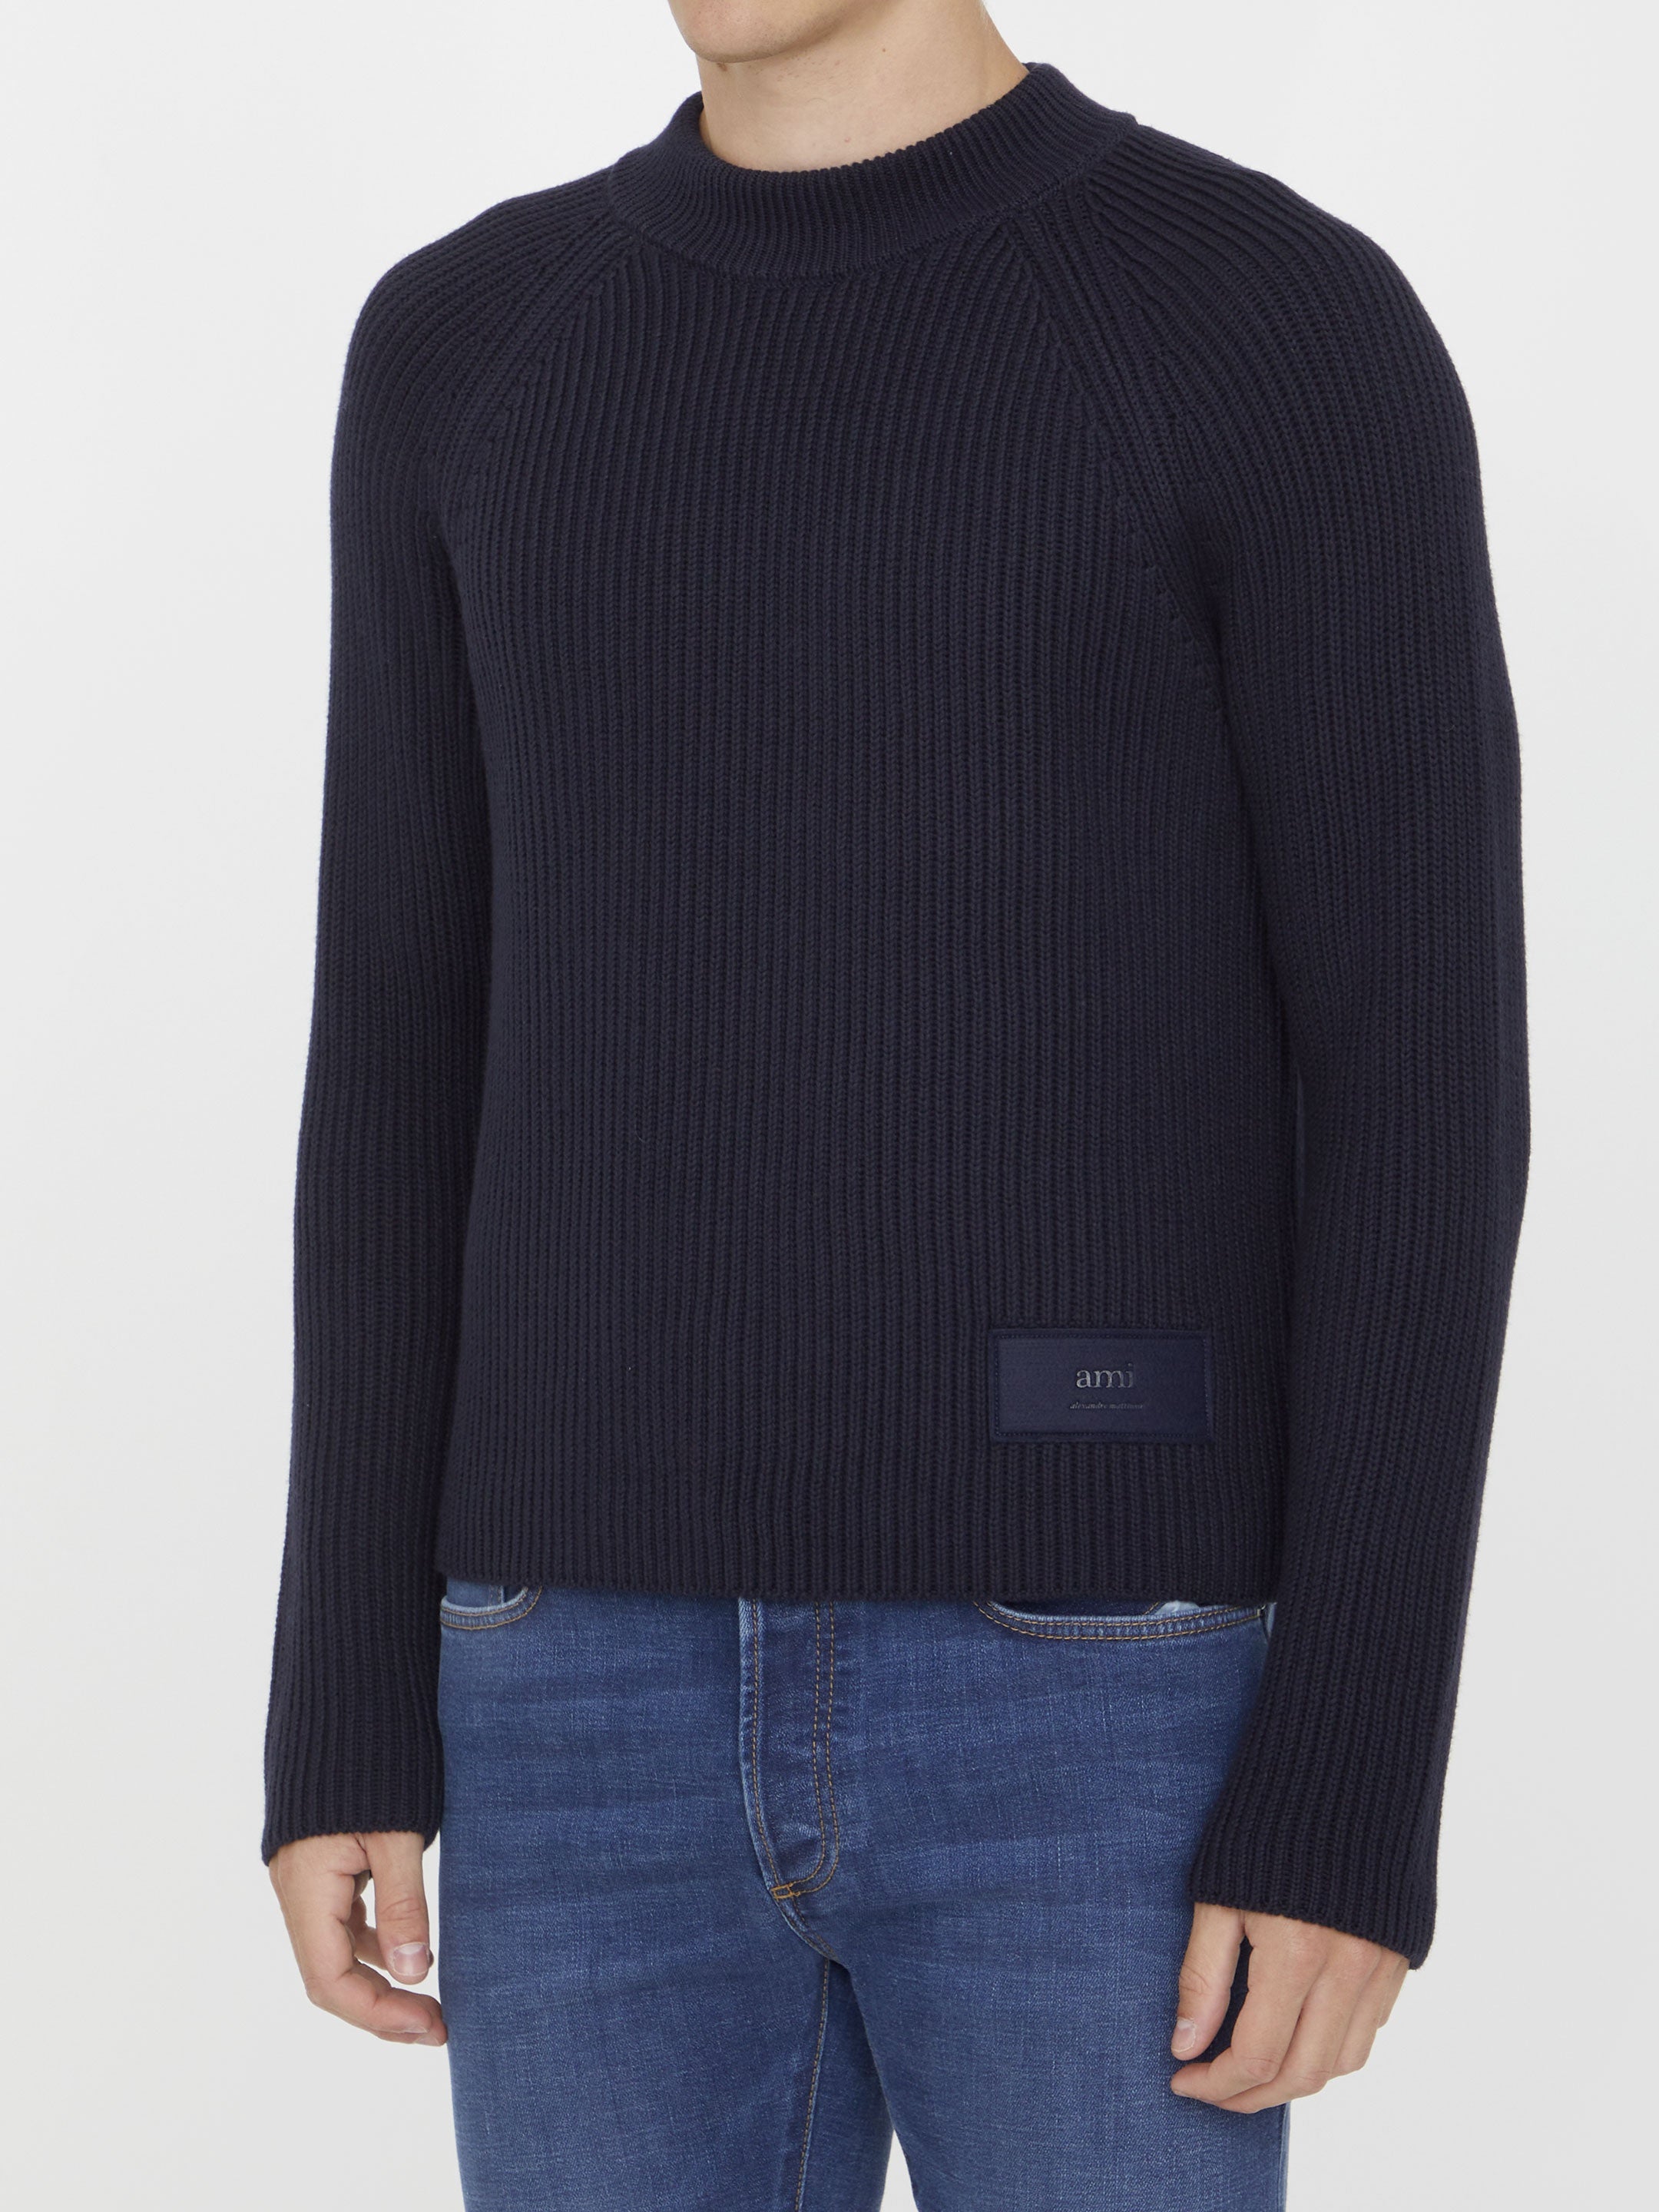 Blue jumper with patch